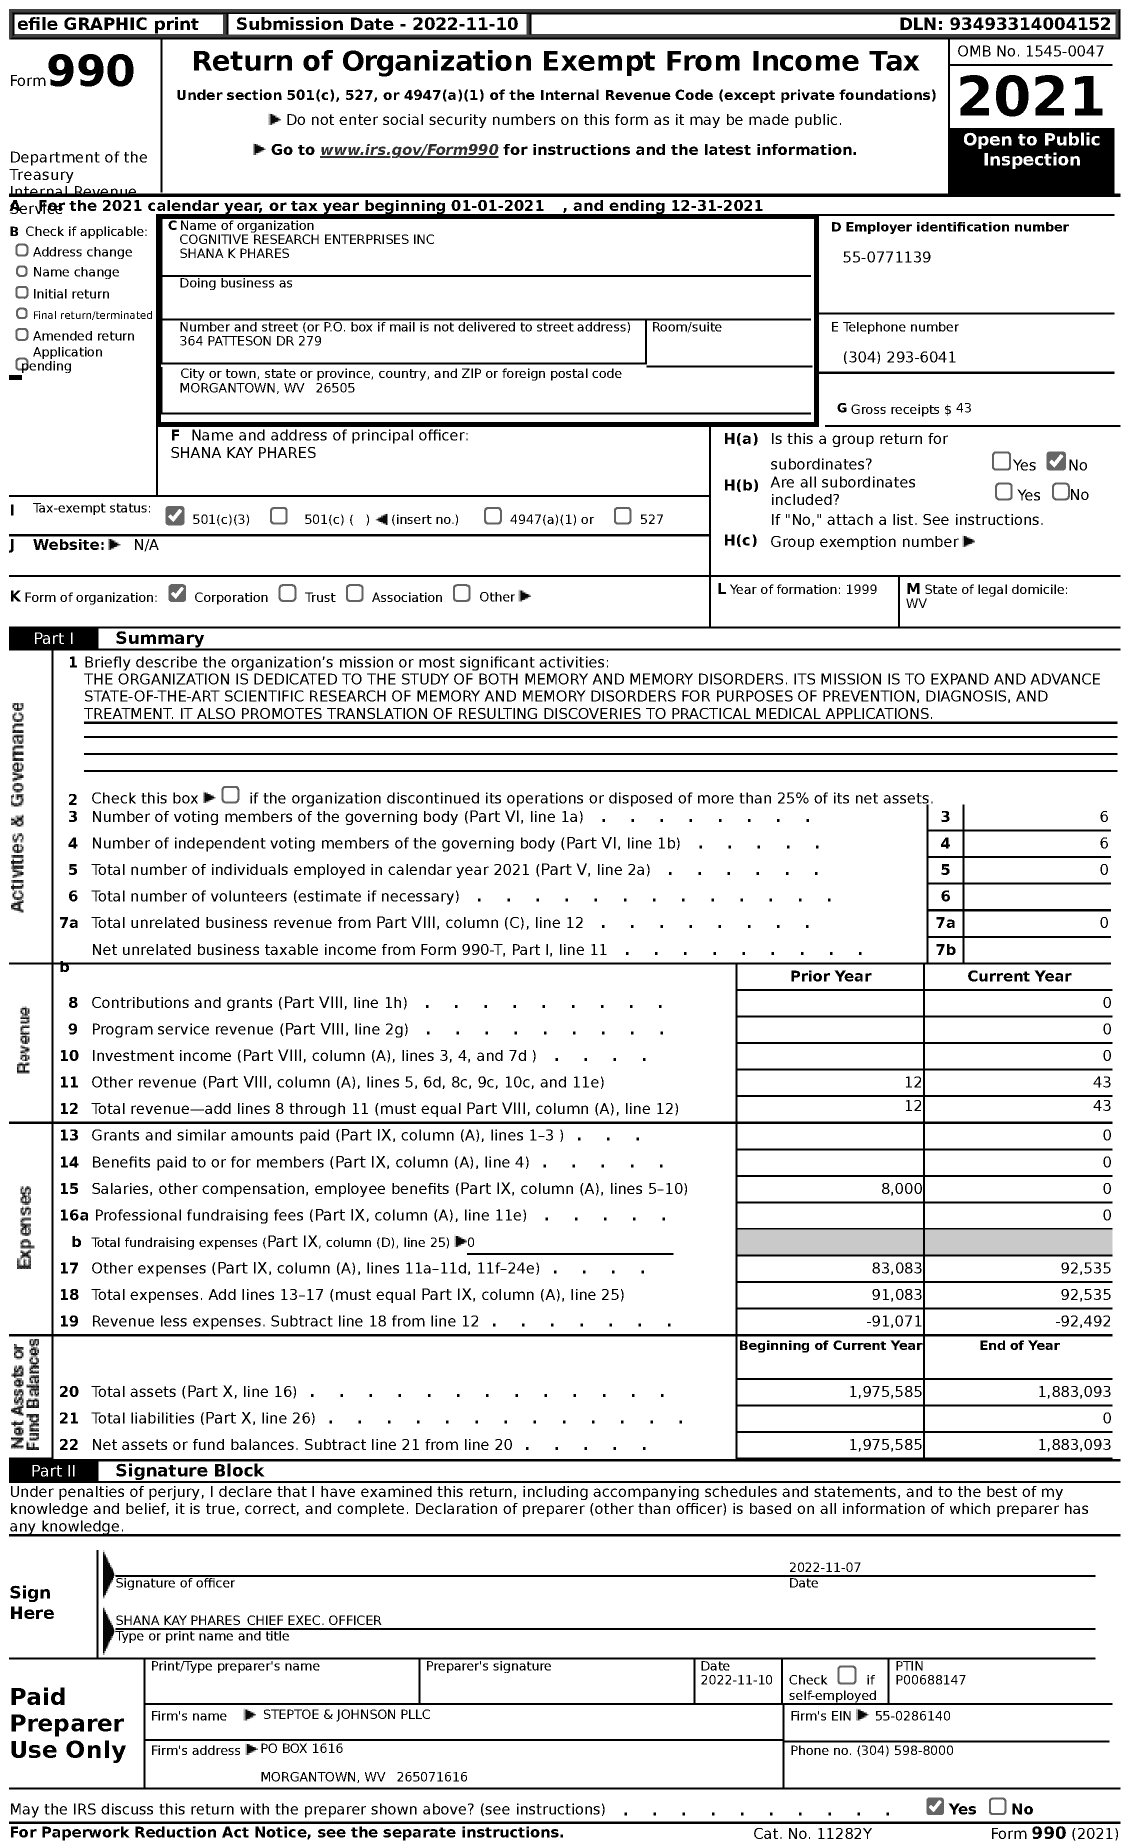 Image of first page of 2021 Form 990 for Cognitive Research Enterprises